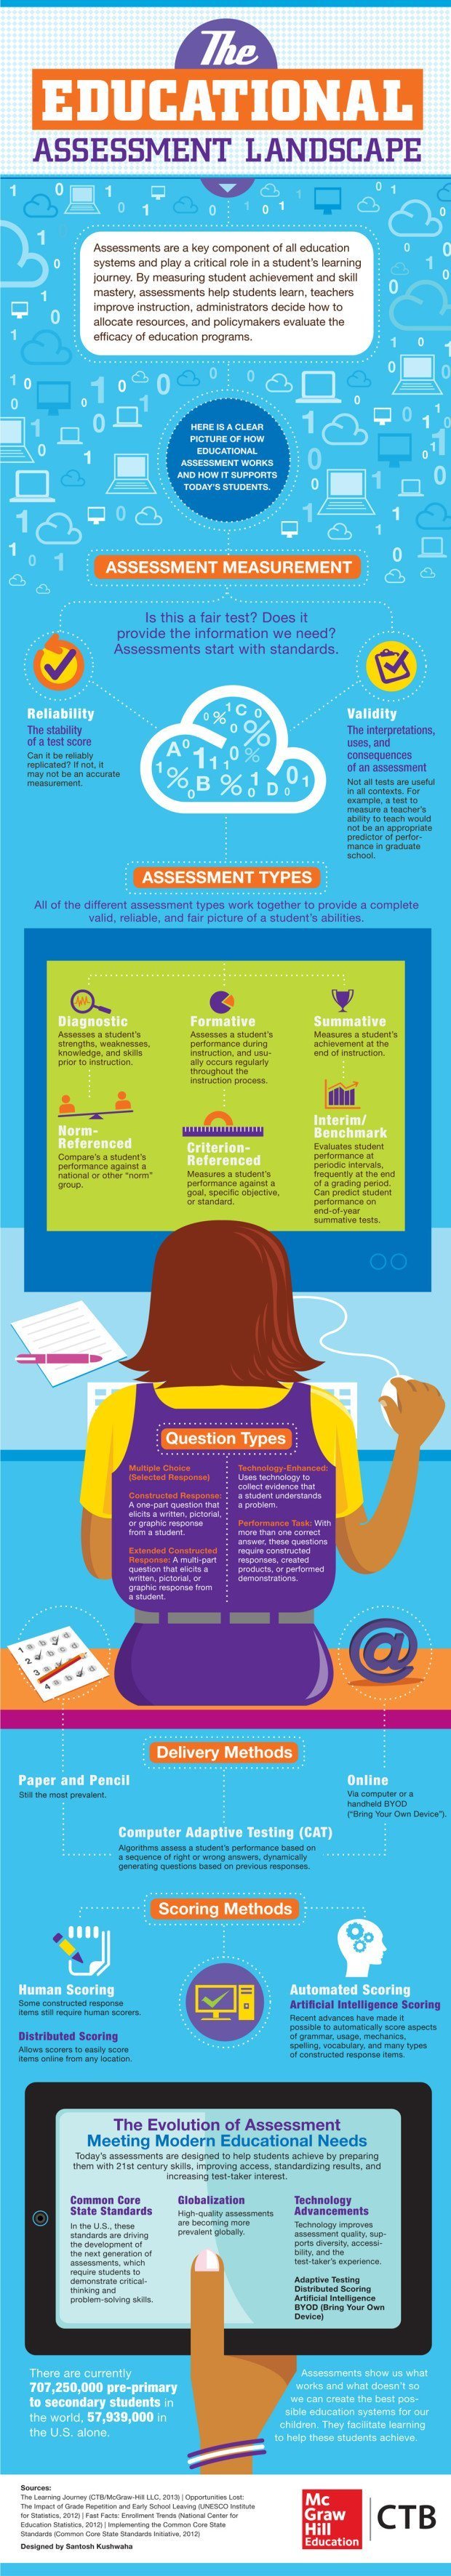 The Educational Assessment Landscape Infographic